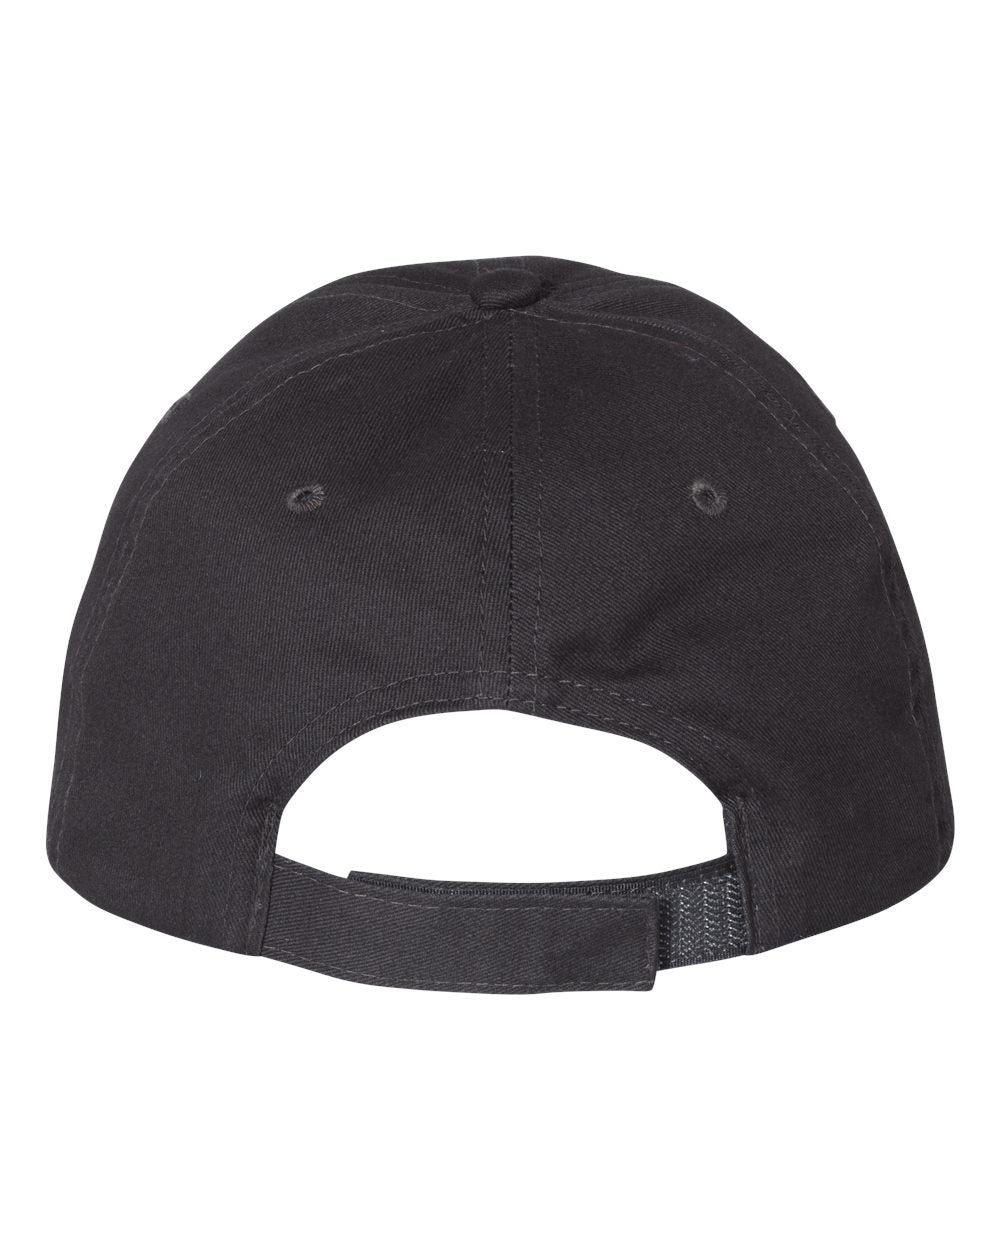 Adult Brushed Twill Cap, Charcoal